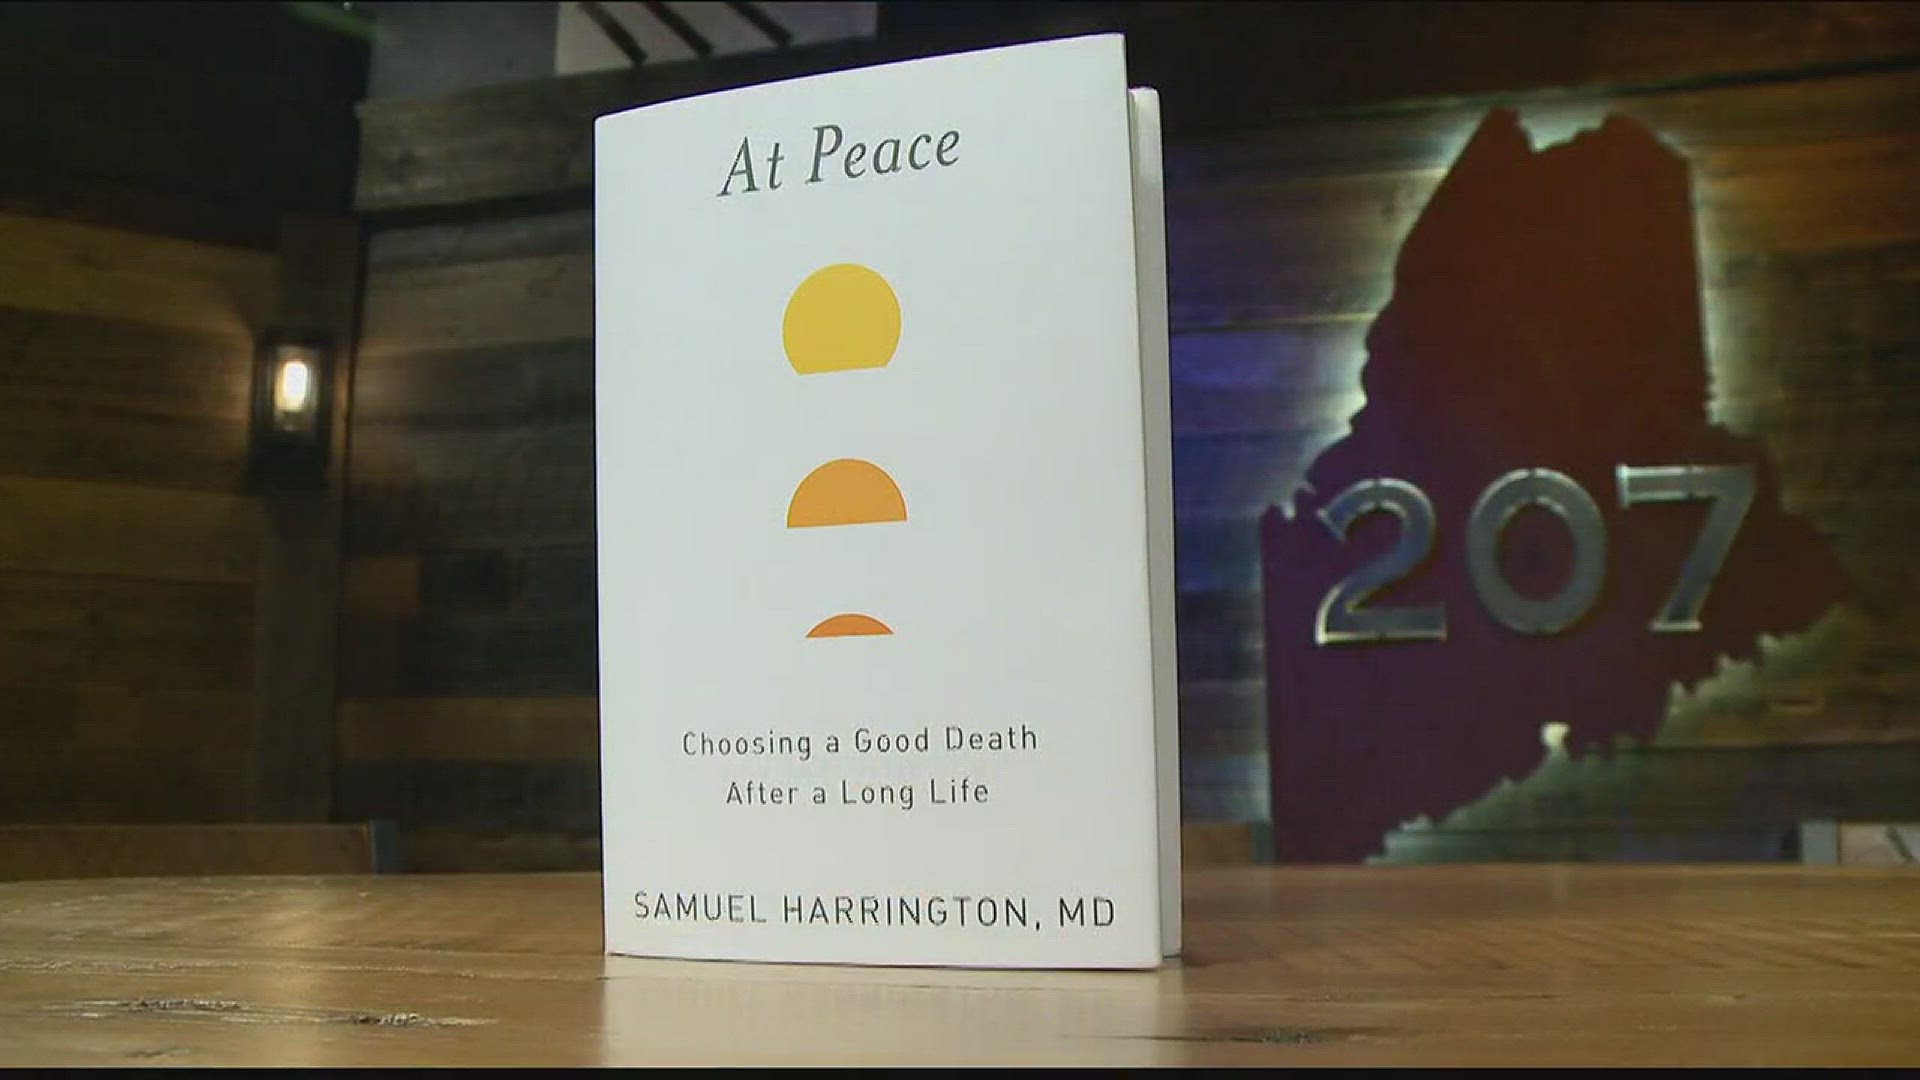 Dr Samuel Harrington's new book, At Peace, is a book about a good death.